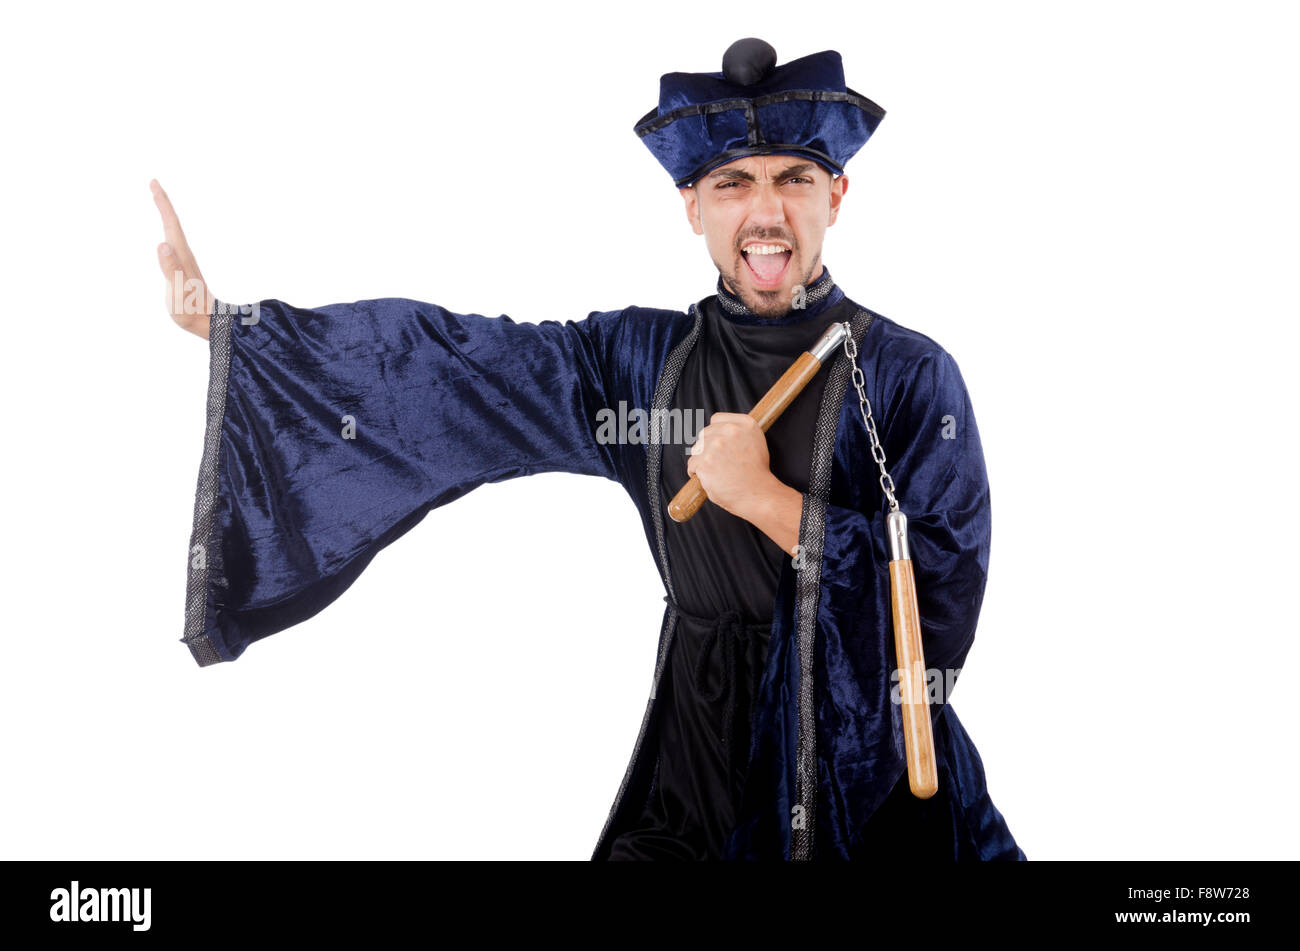 Martial arts master with nunchucks on white Stock Photo